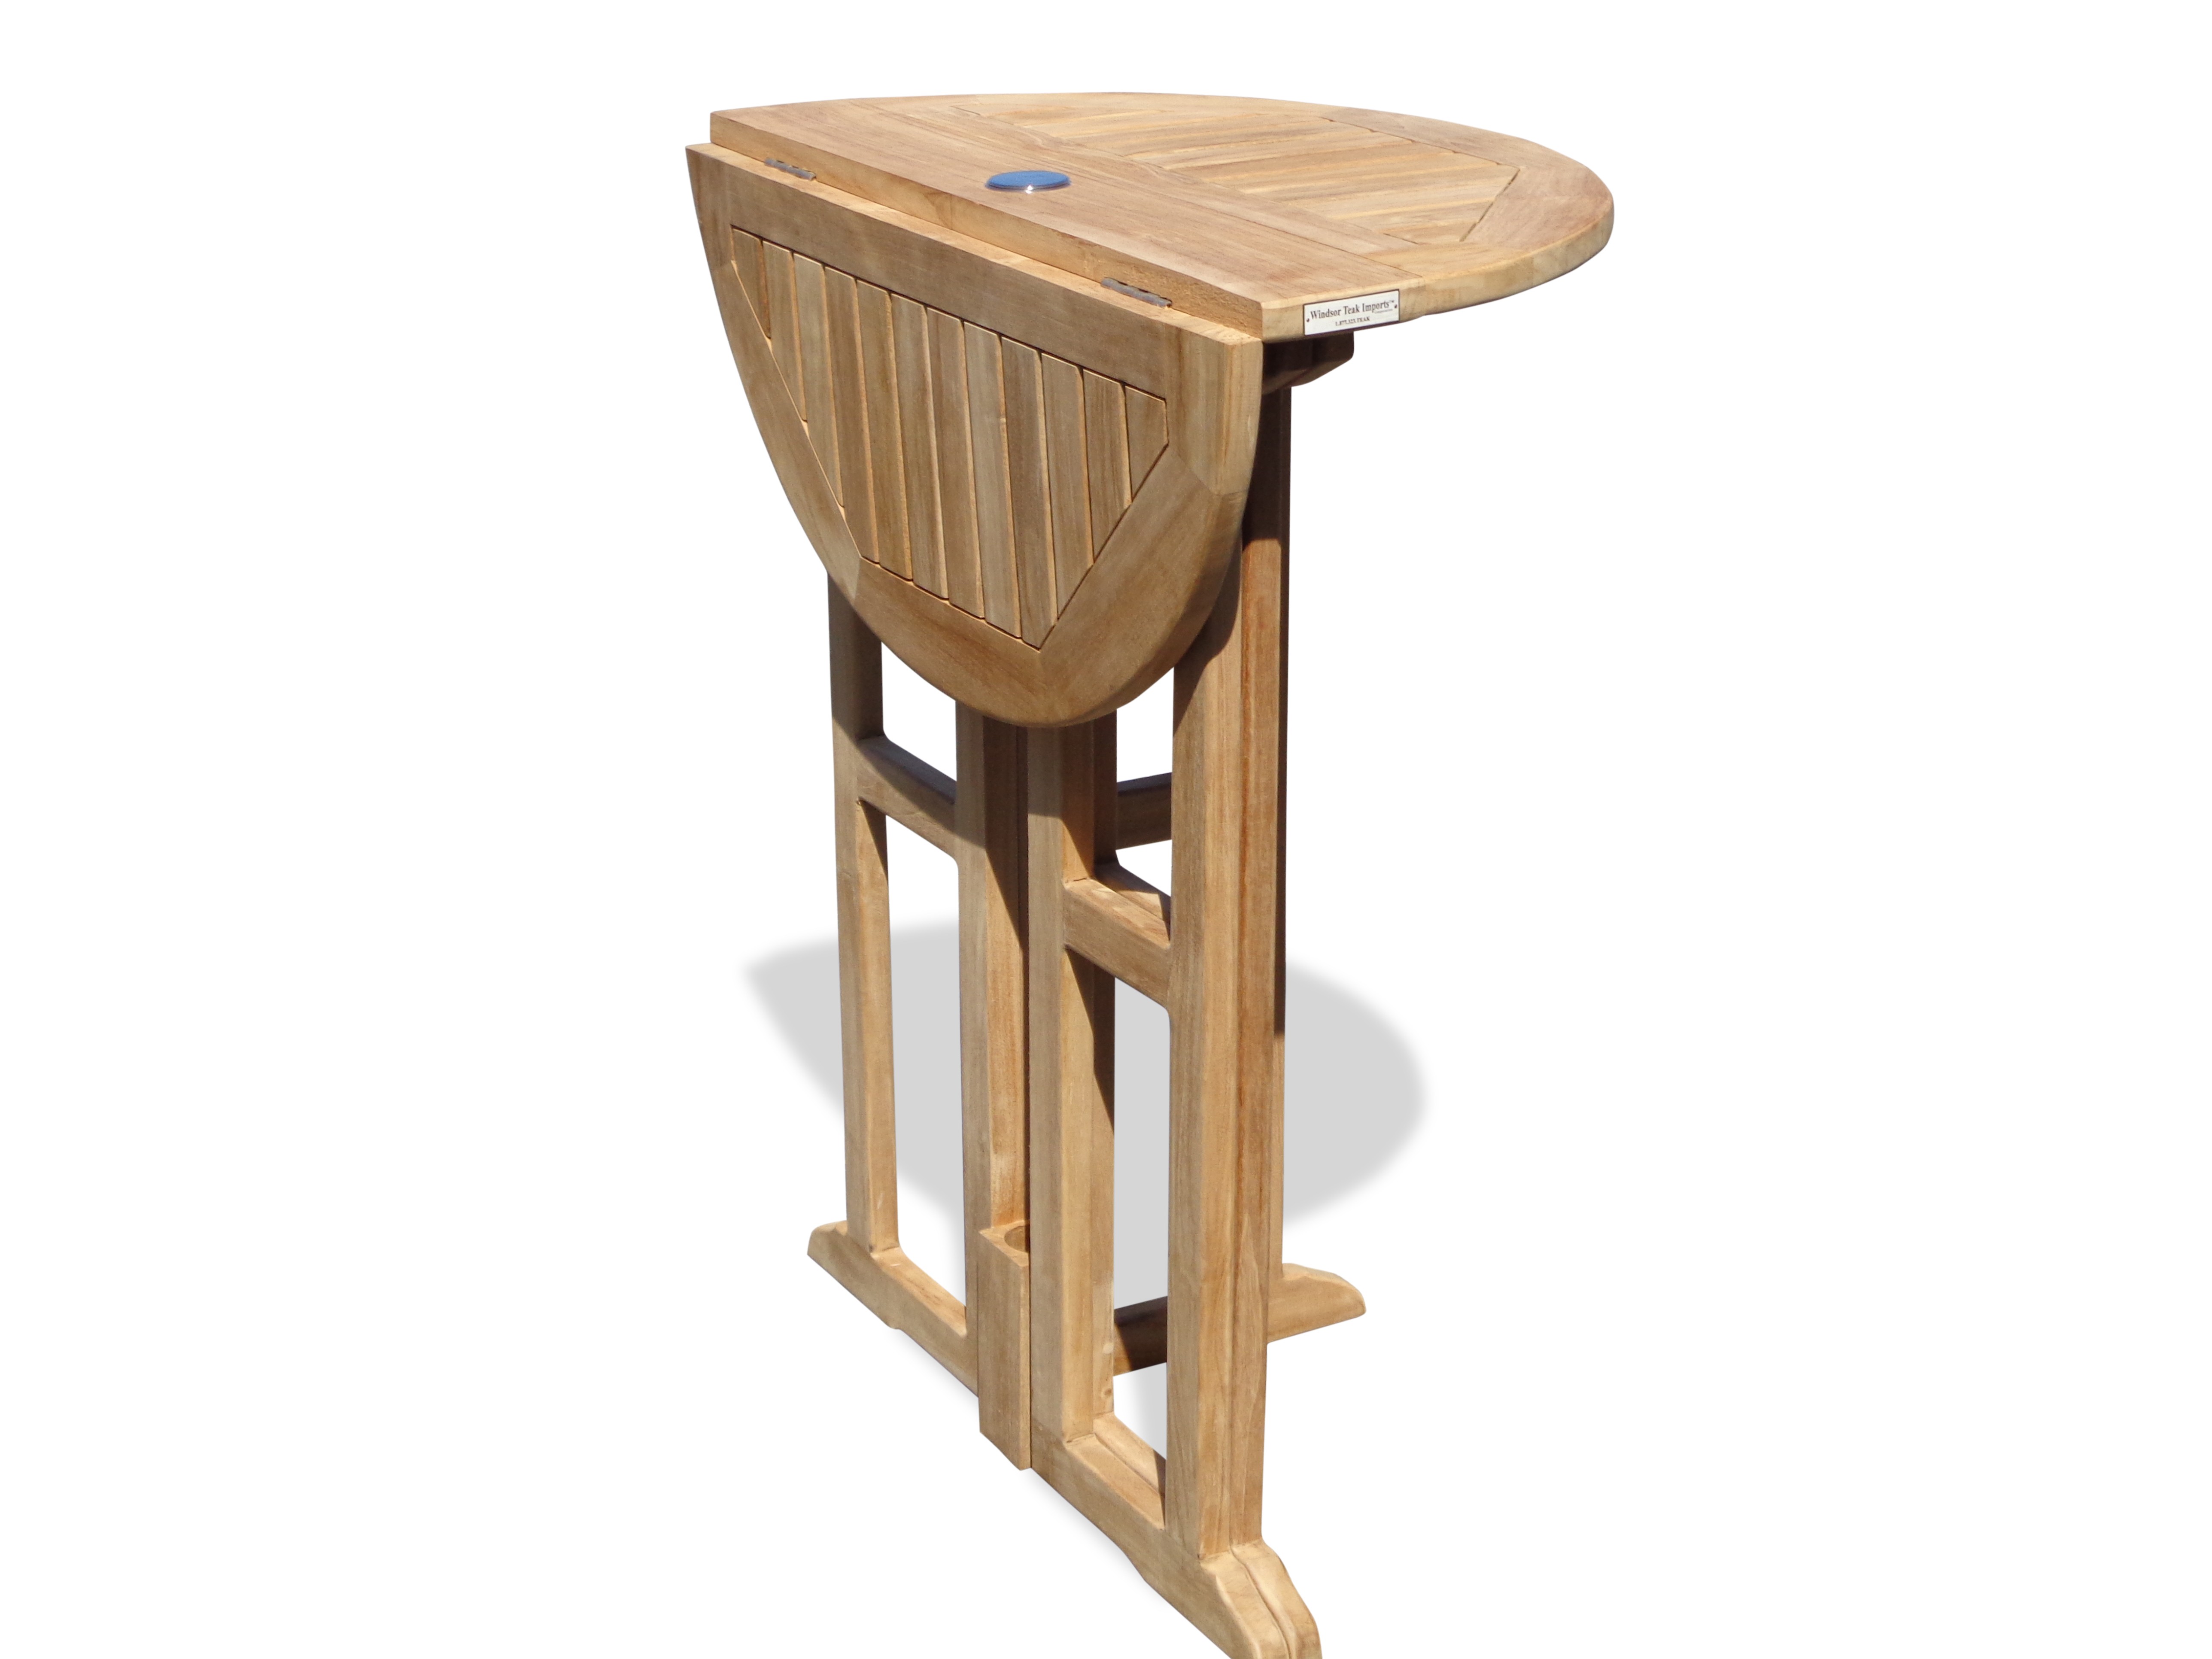 Bimini 39" Premium Teak Round Drop Leaf Folding Counter Table ...use with 1 Leaf Up or 2.... Makes 2 different tables (Counter height is 5" lower than bar)